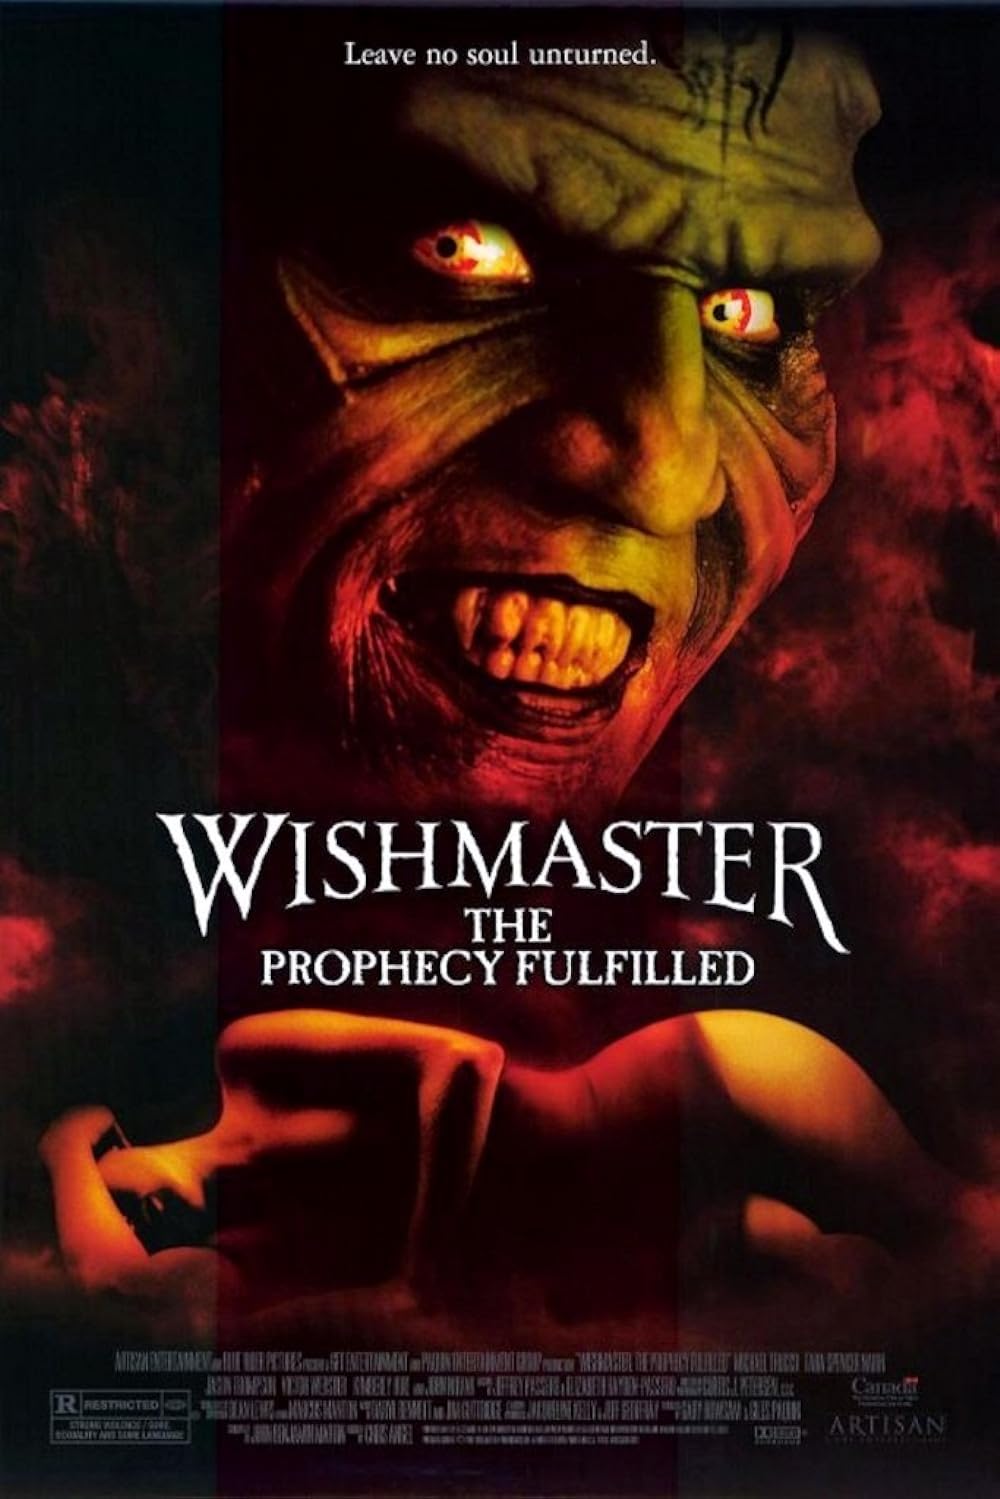 FULL MOVIE: Wishmaster 4: The Prophecy Fulfilled (2002)